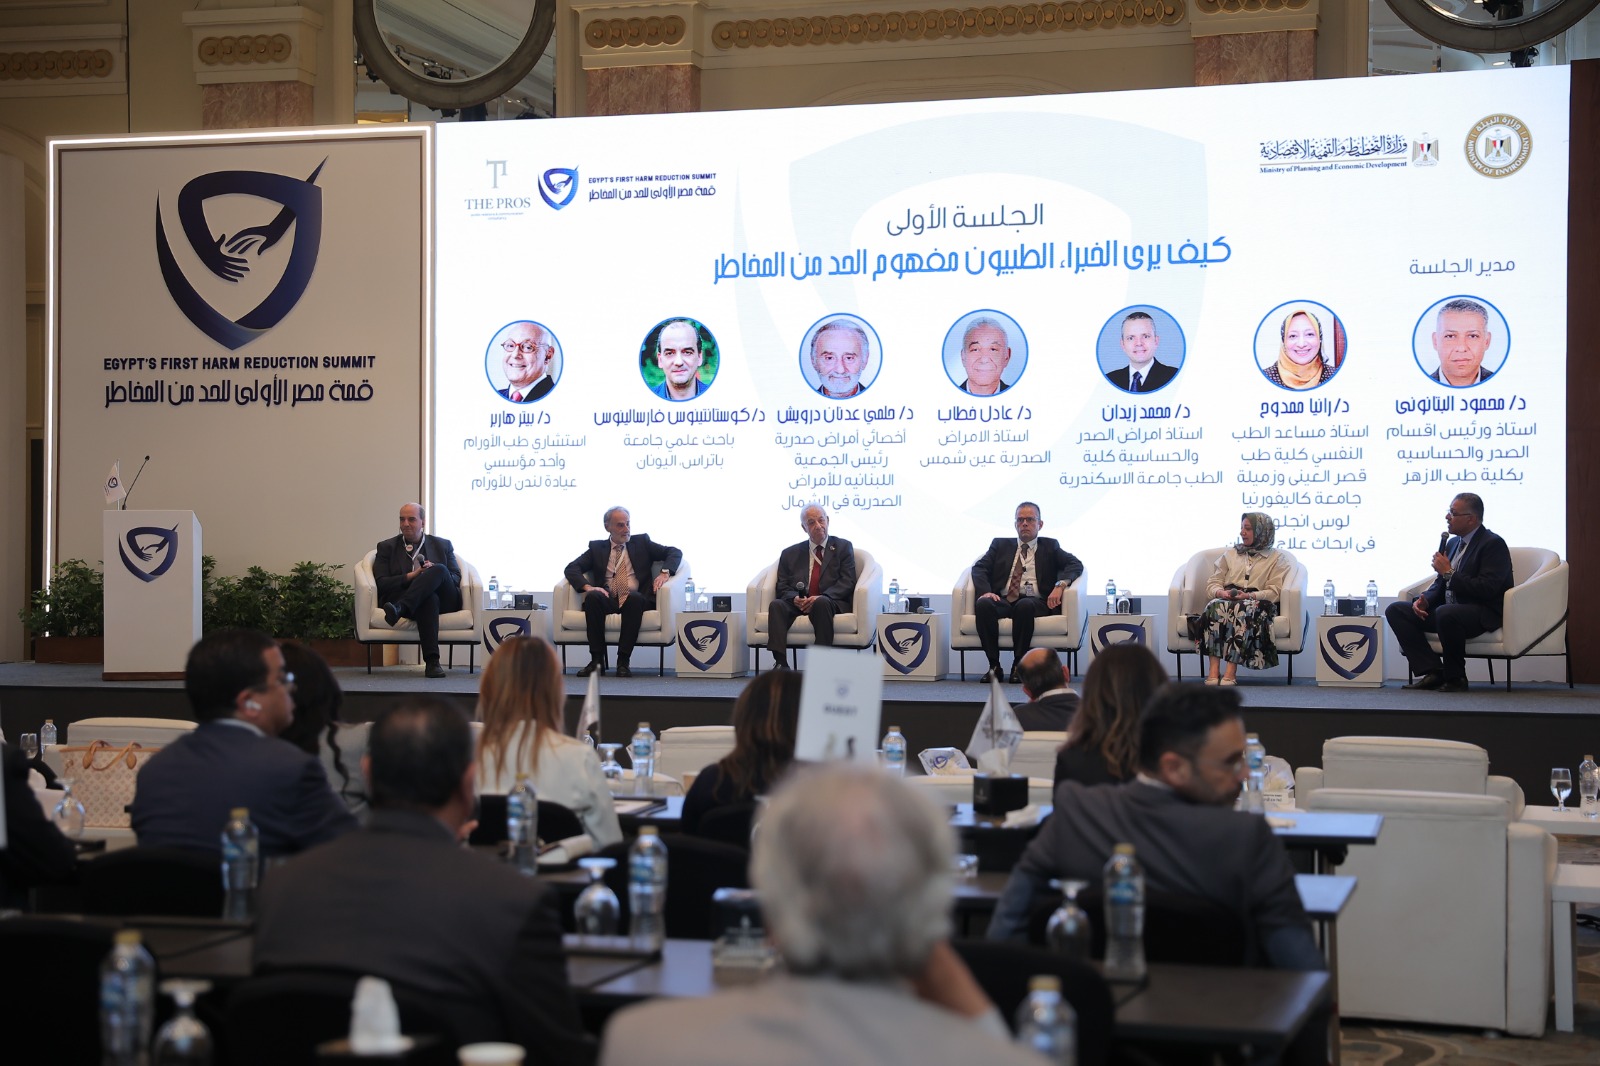 Egypt’s first summit to reduce risks confirms the role of alternative products in reducing the percentage of smokers  Mix